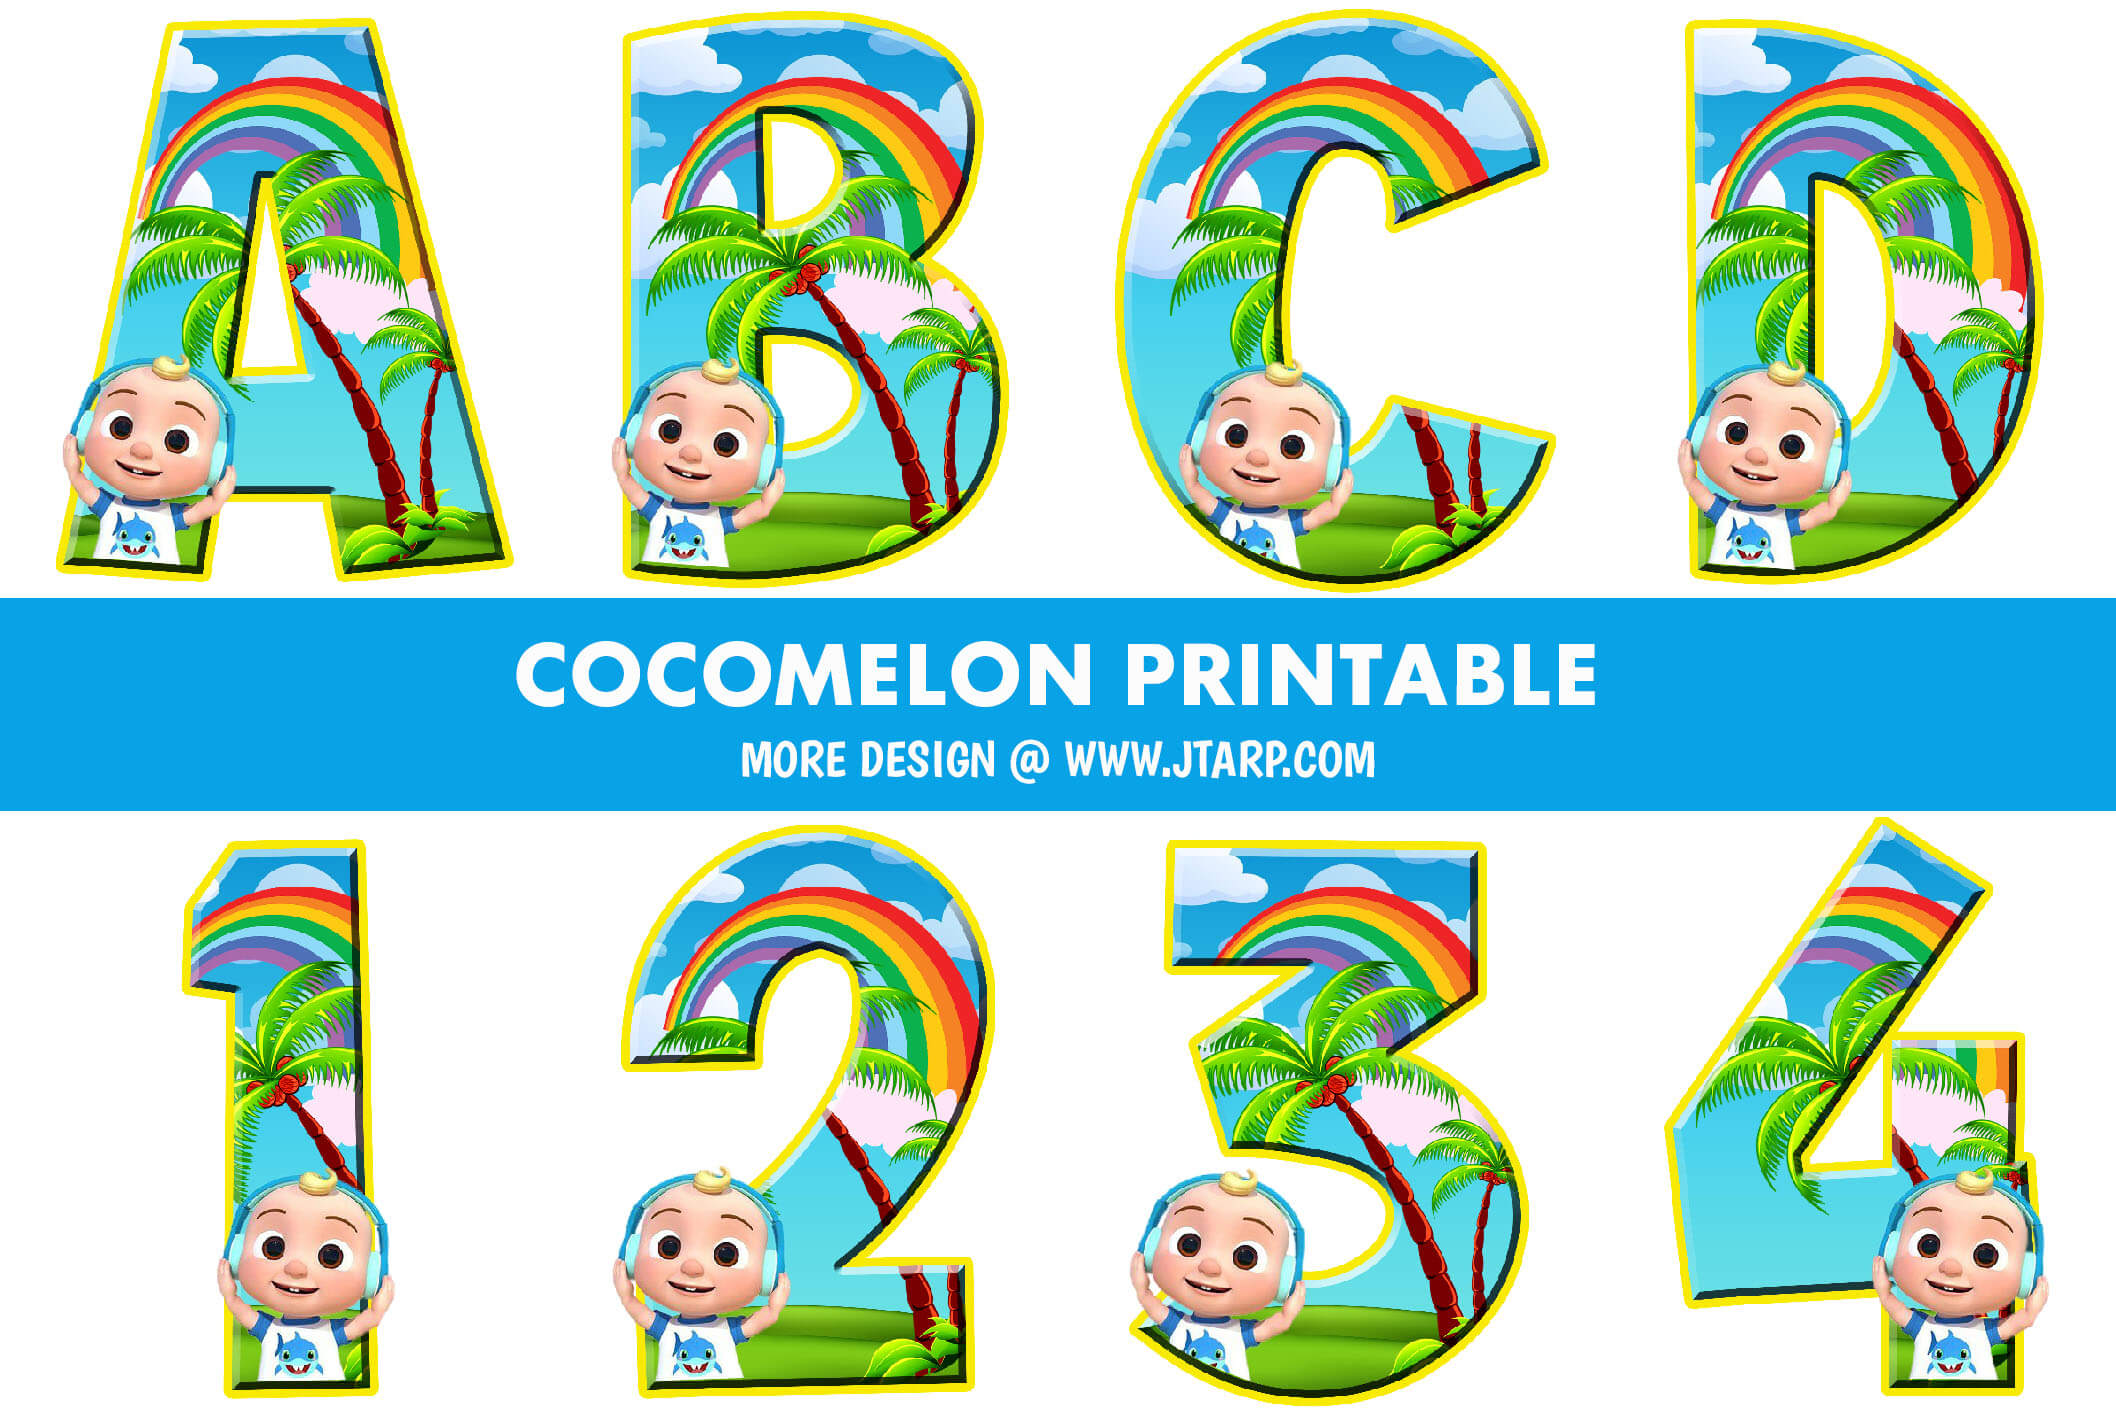 cocomelon free printables alphabet letters and numbers printable